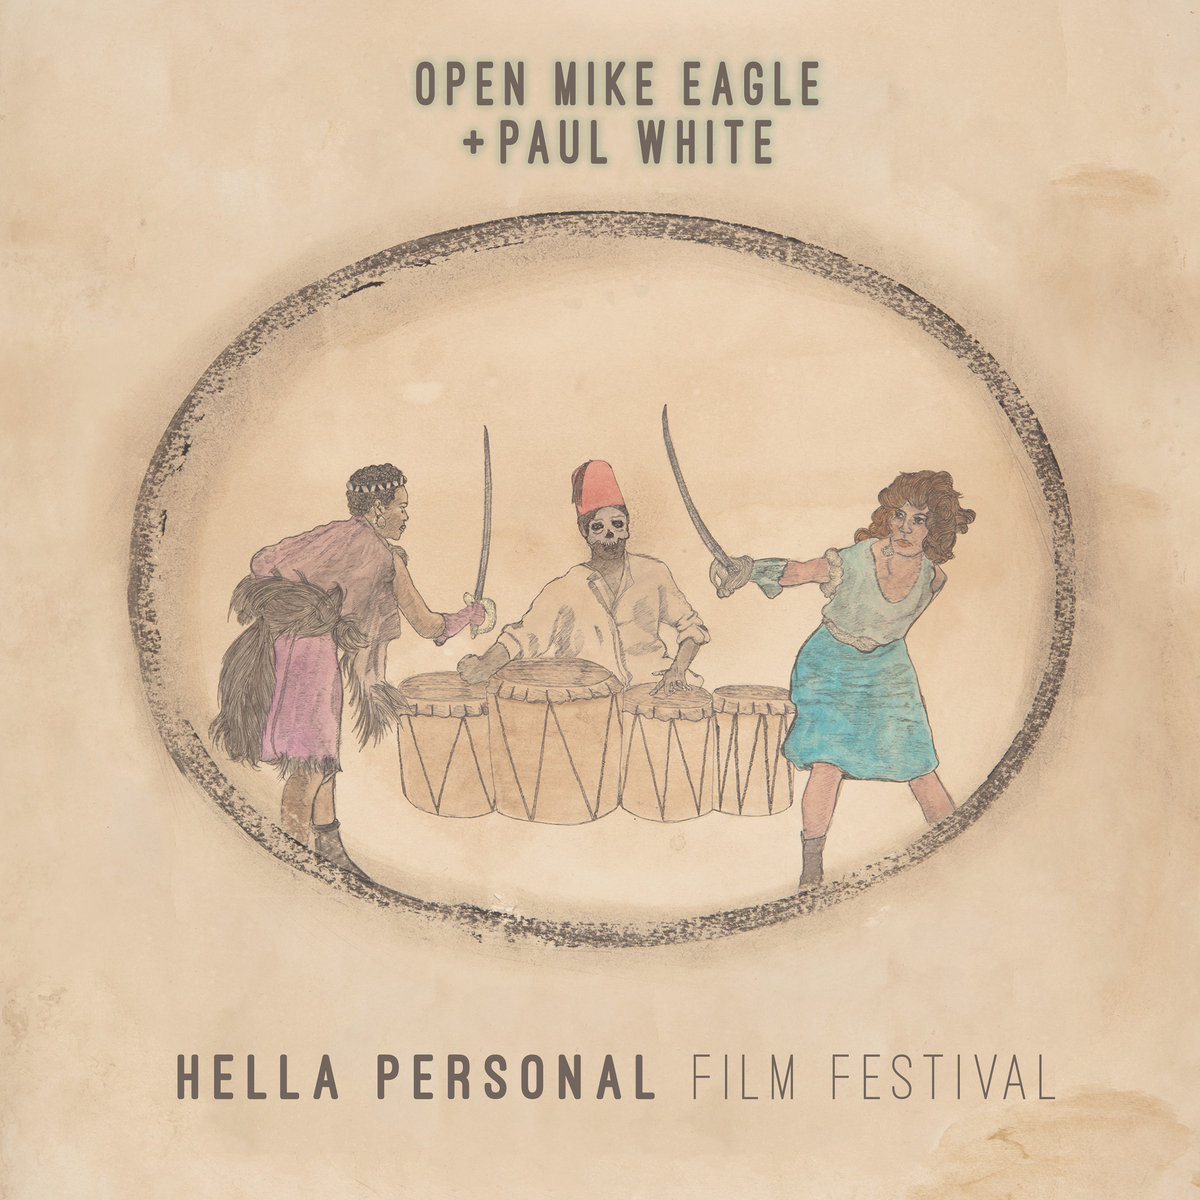 Open Mike Eagle & Paul White - "Check To Check"